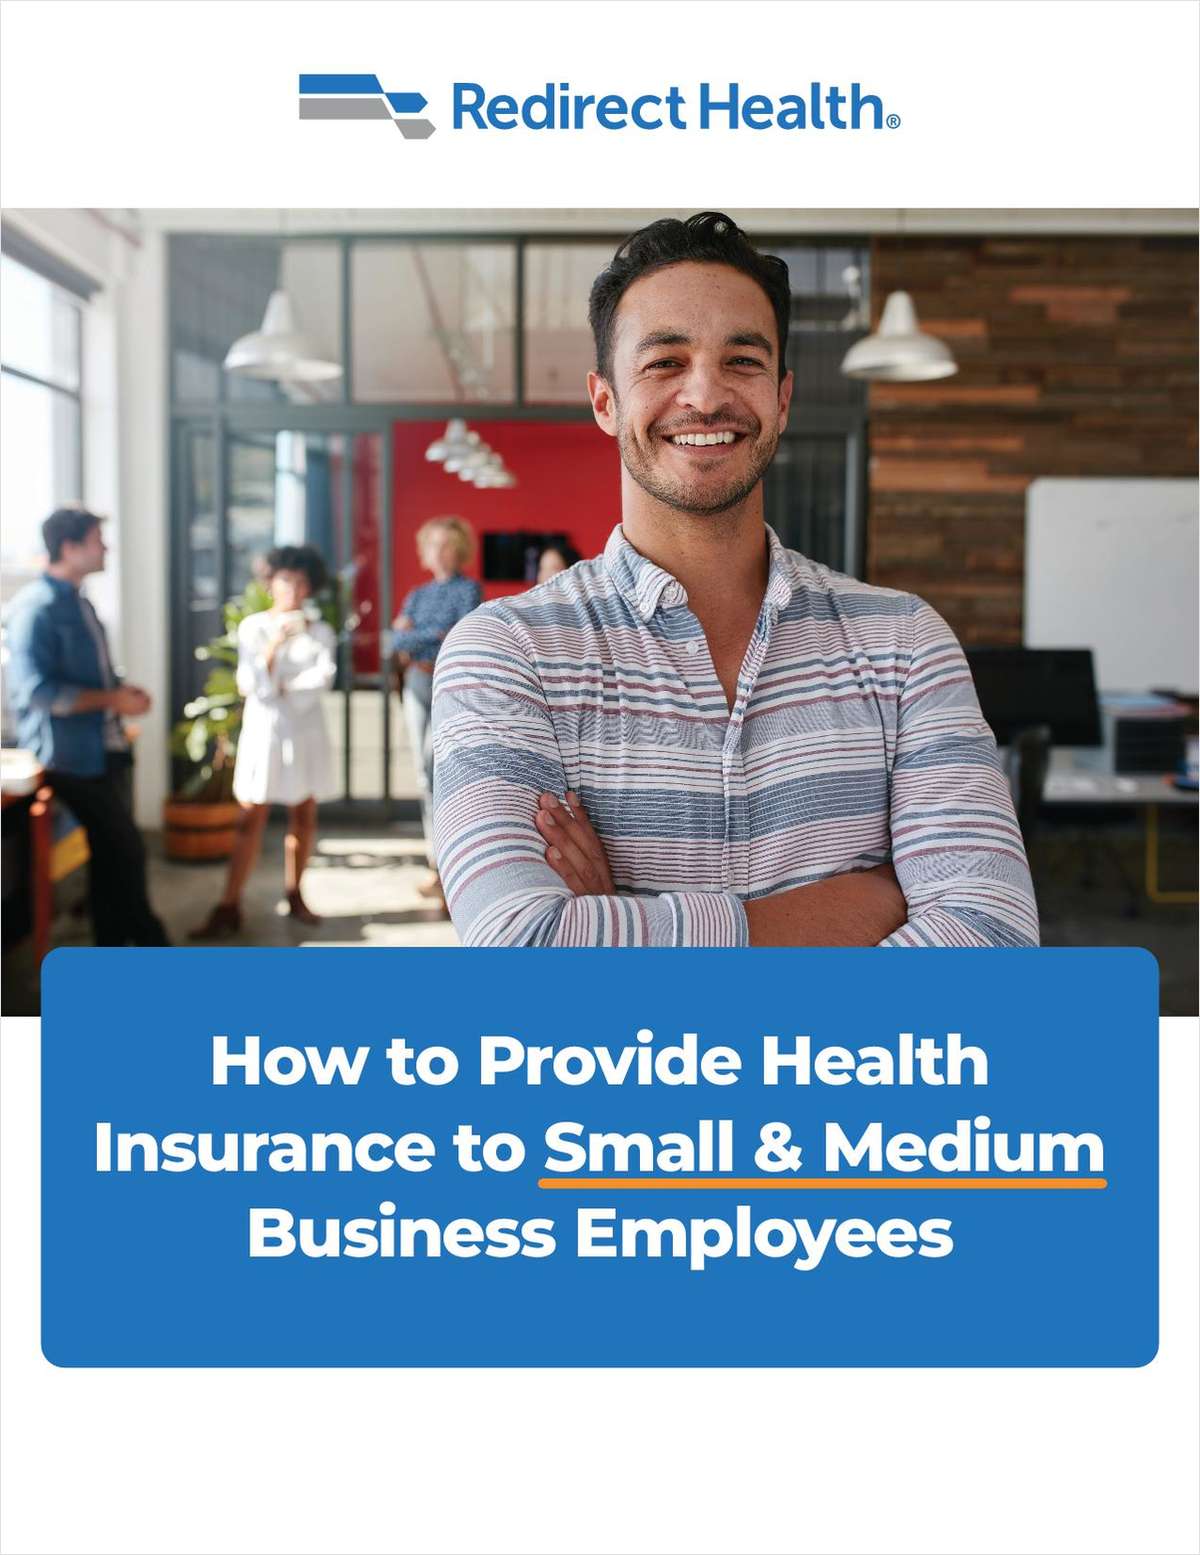 How to Provide Health Insurance to Small & Medium Business Employees link